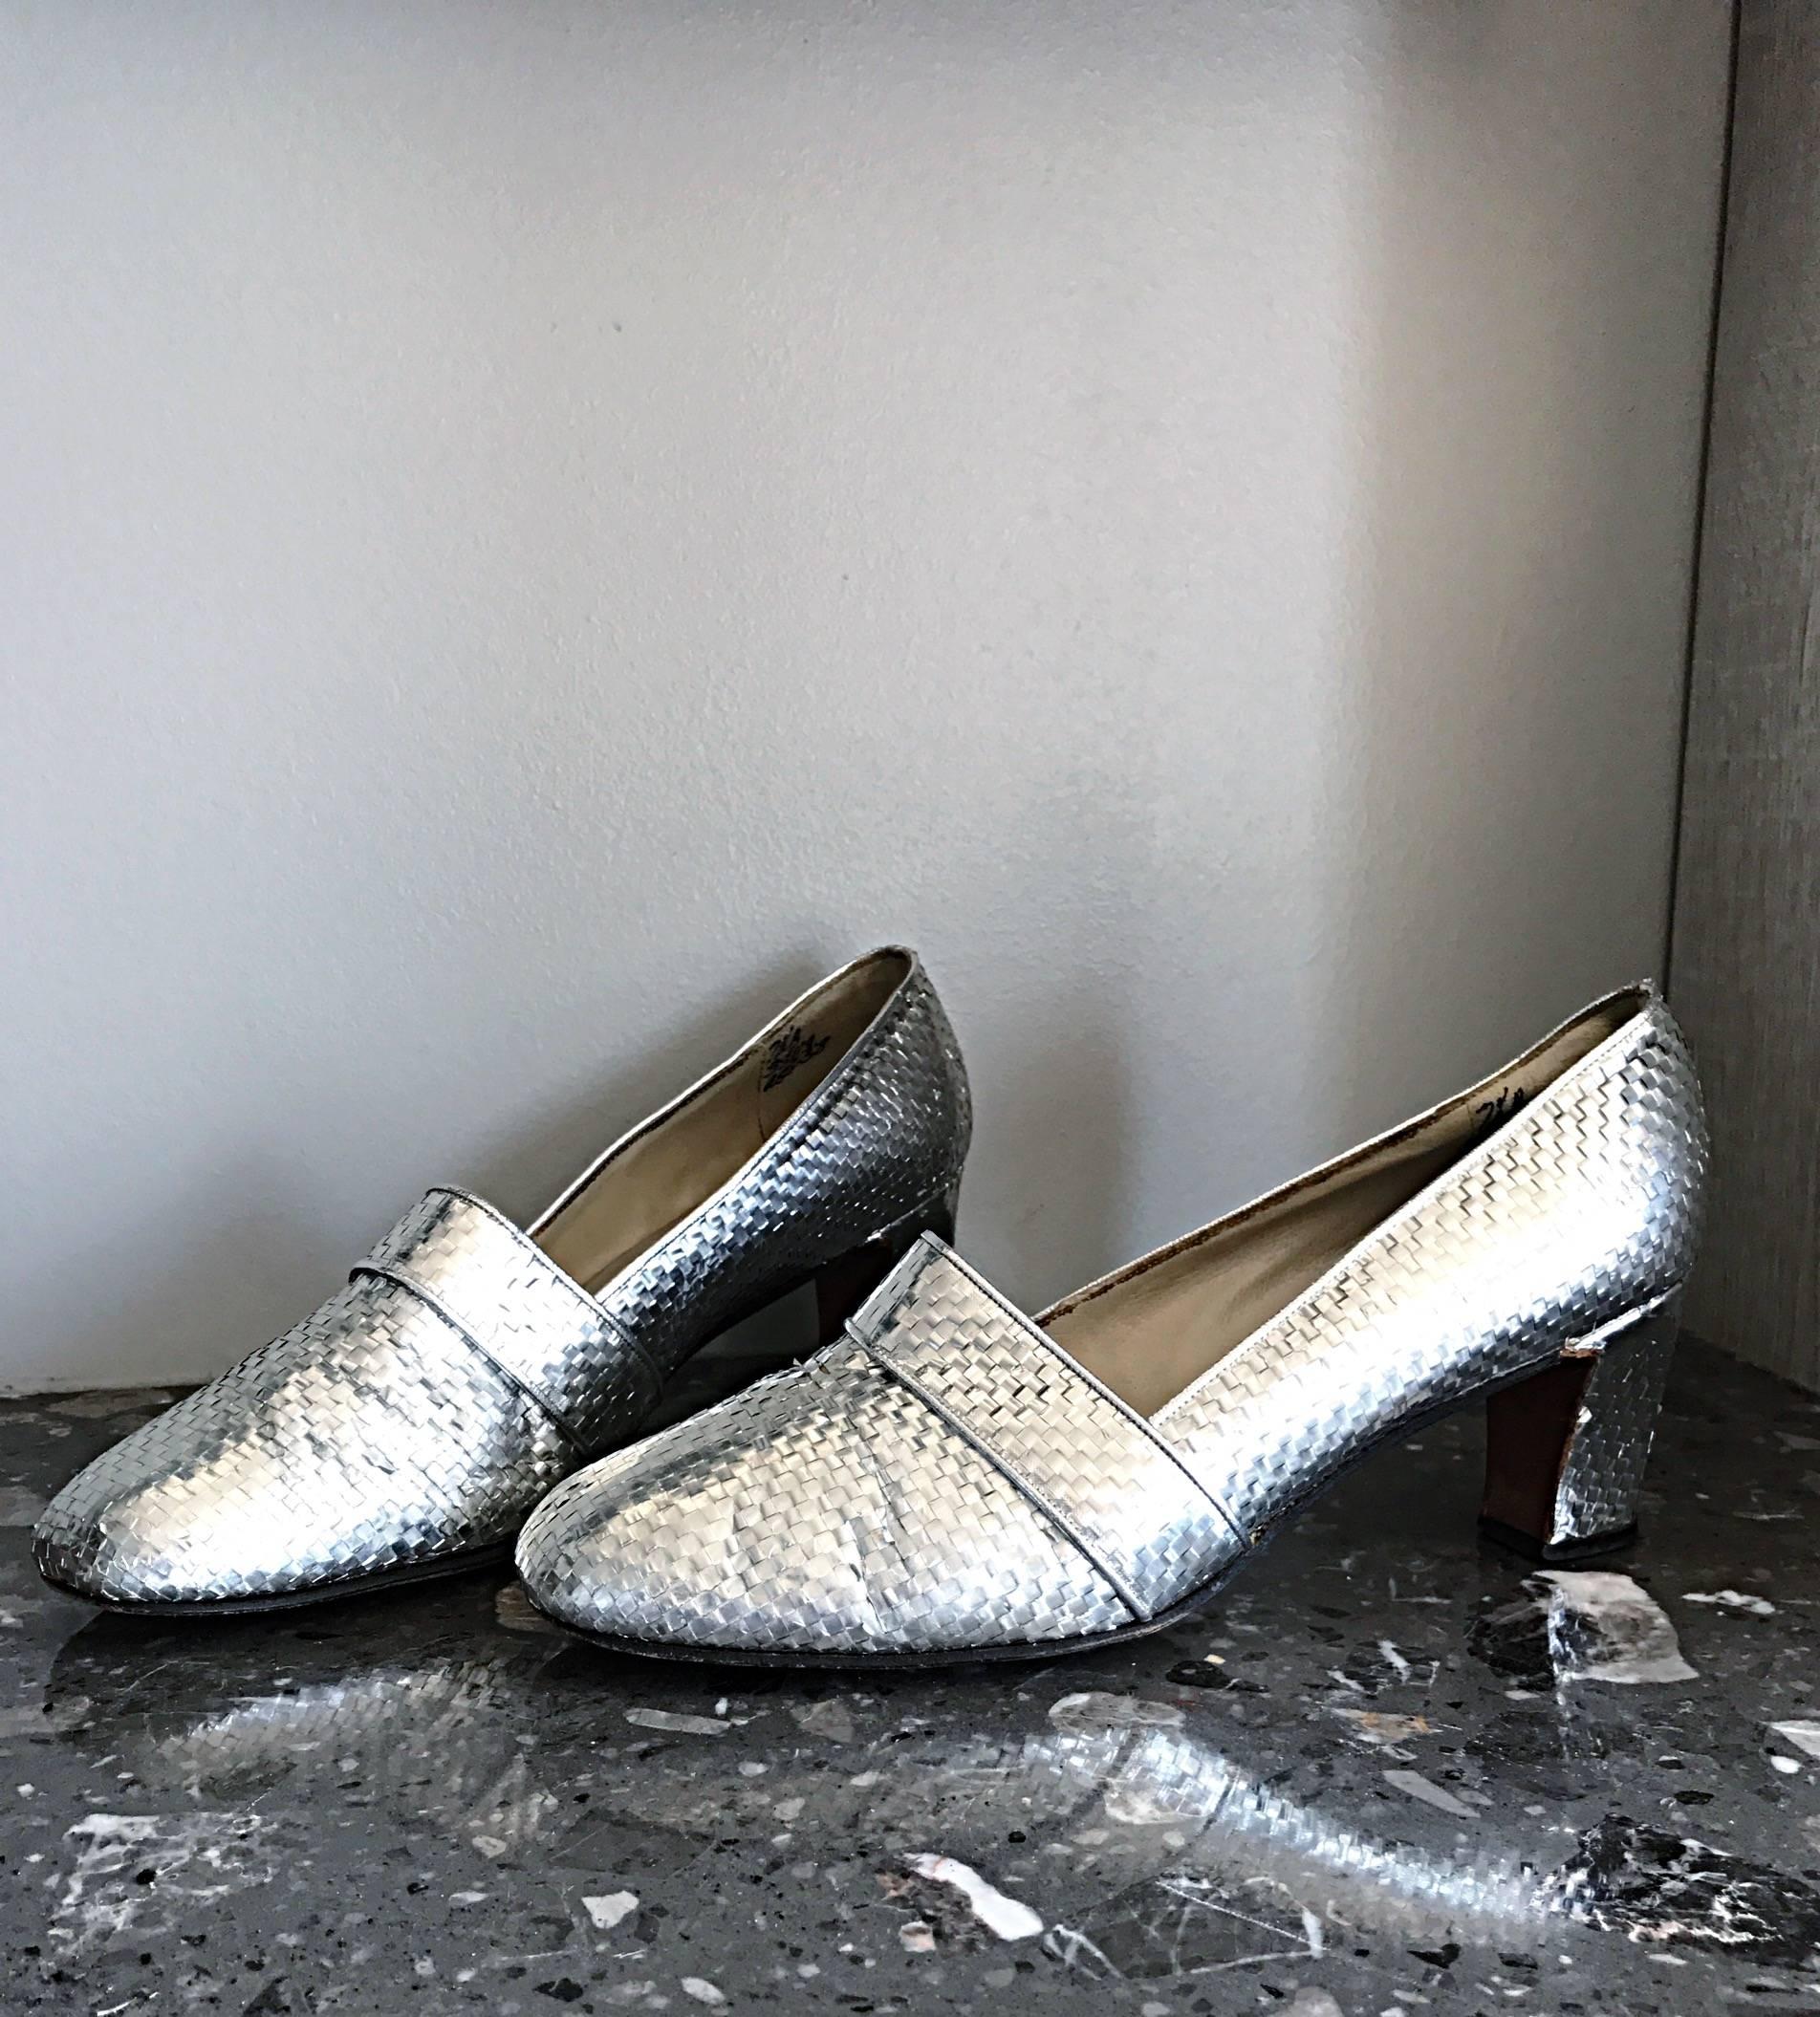 Chic vintage mod 1960s HERBERT LEVINE silver woven leather mid heel loafer heels! Woven leather, with incredible amounts of detail! Super comfortable pair of shoes that can easily be dressed up or down. Perfect with jeans, shorts, trousers, a skirt